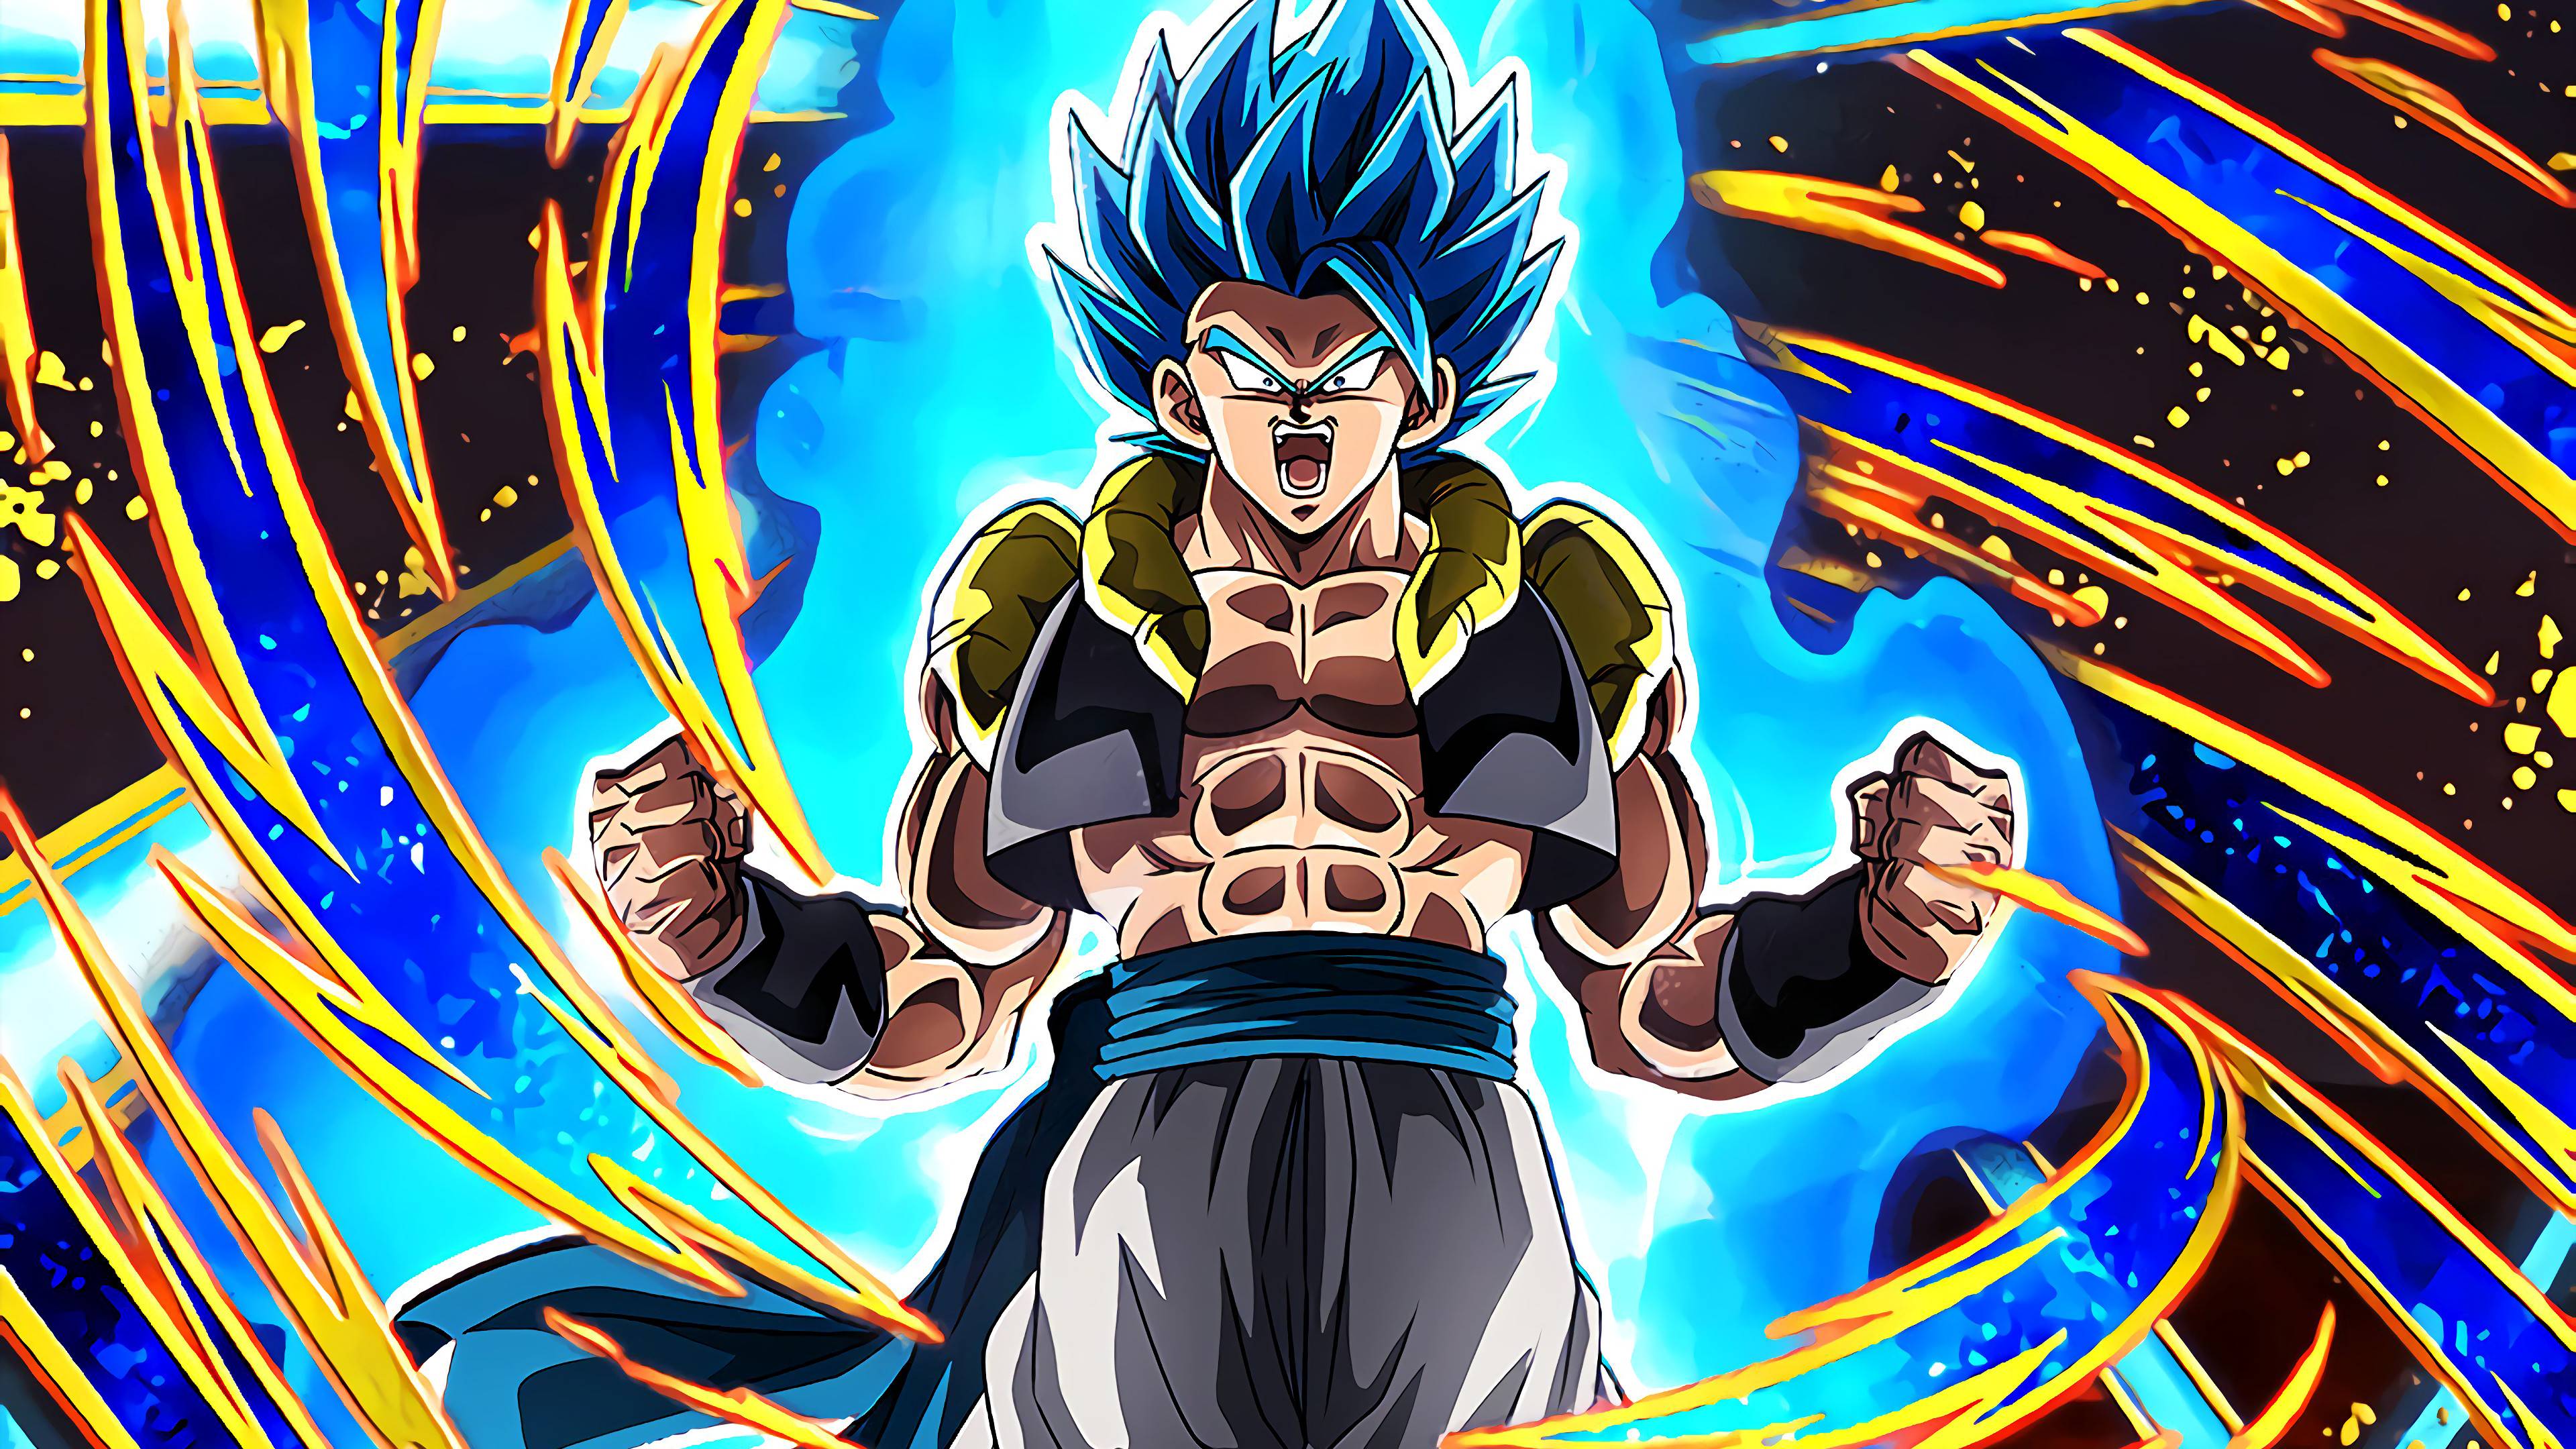 Gogeta Wallpapers 37 images inside